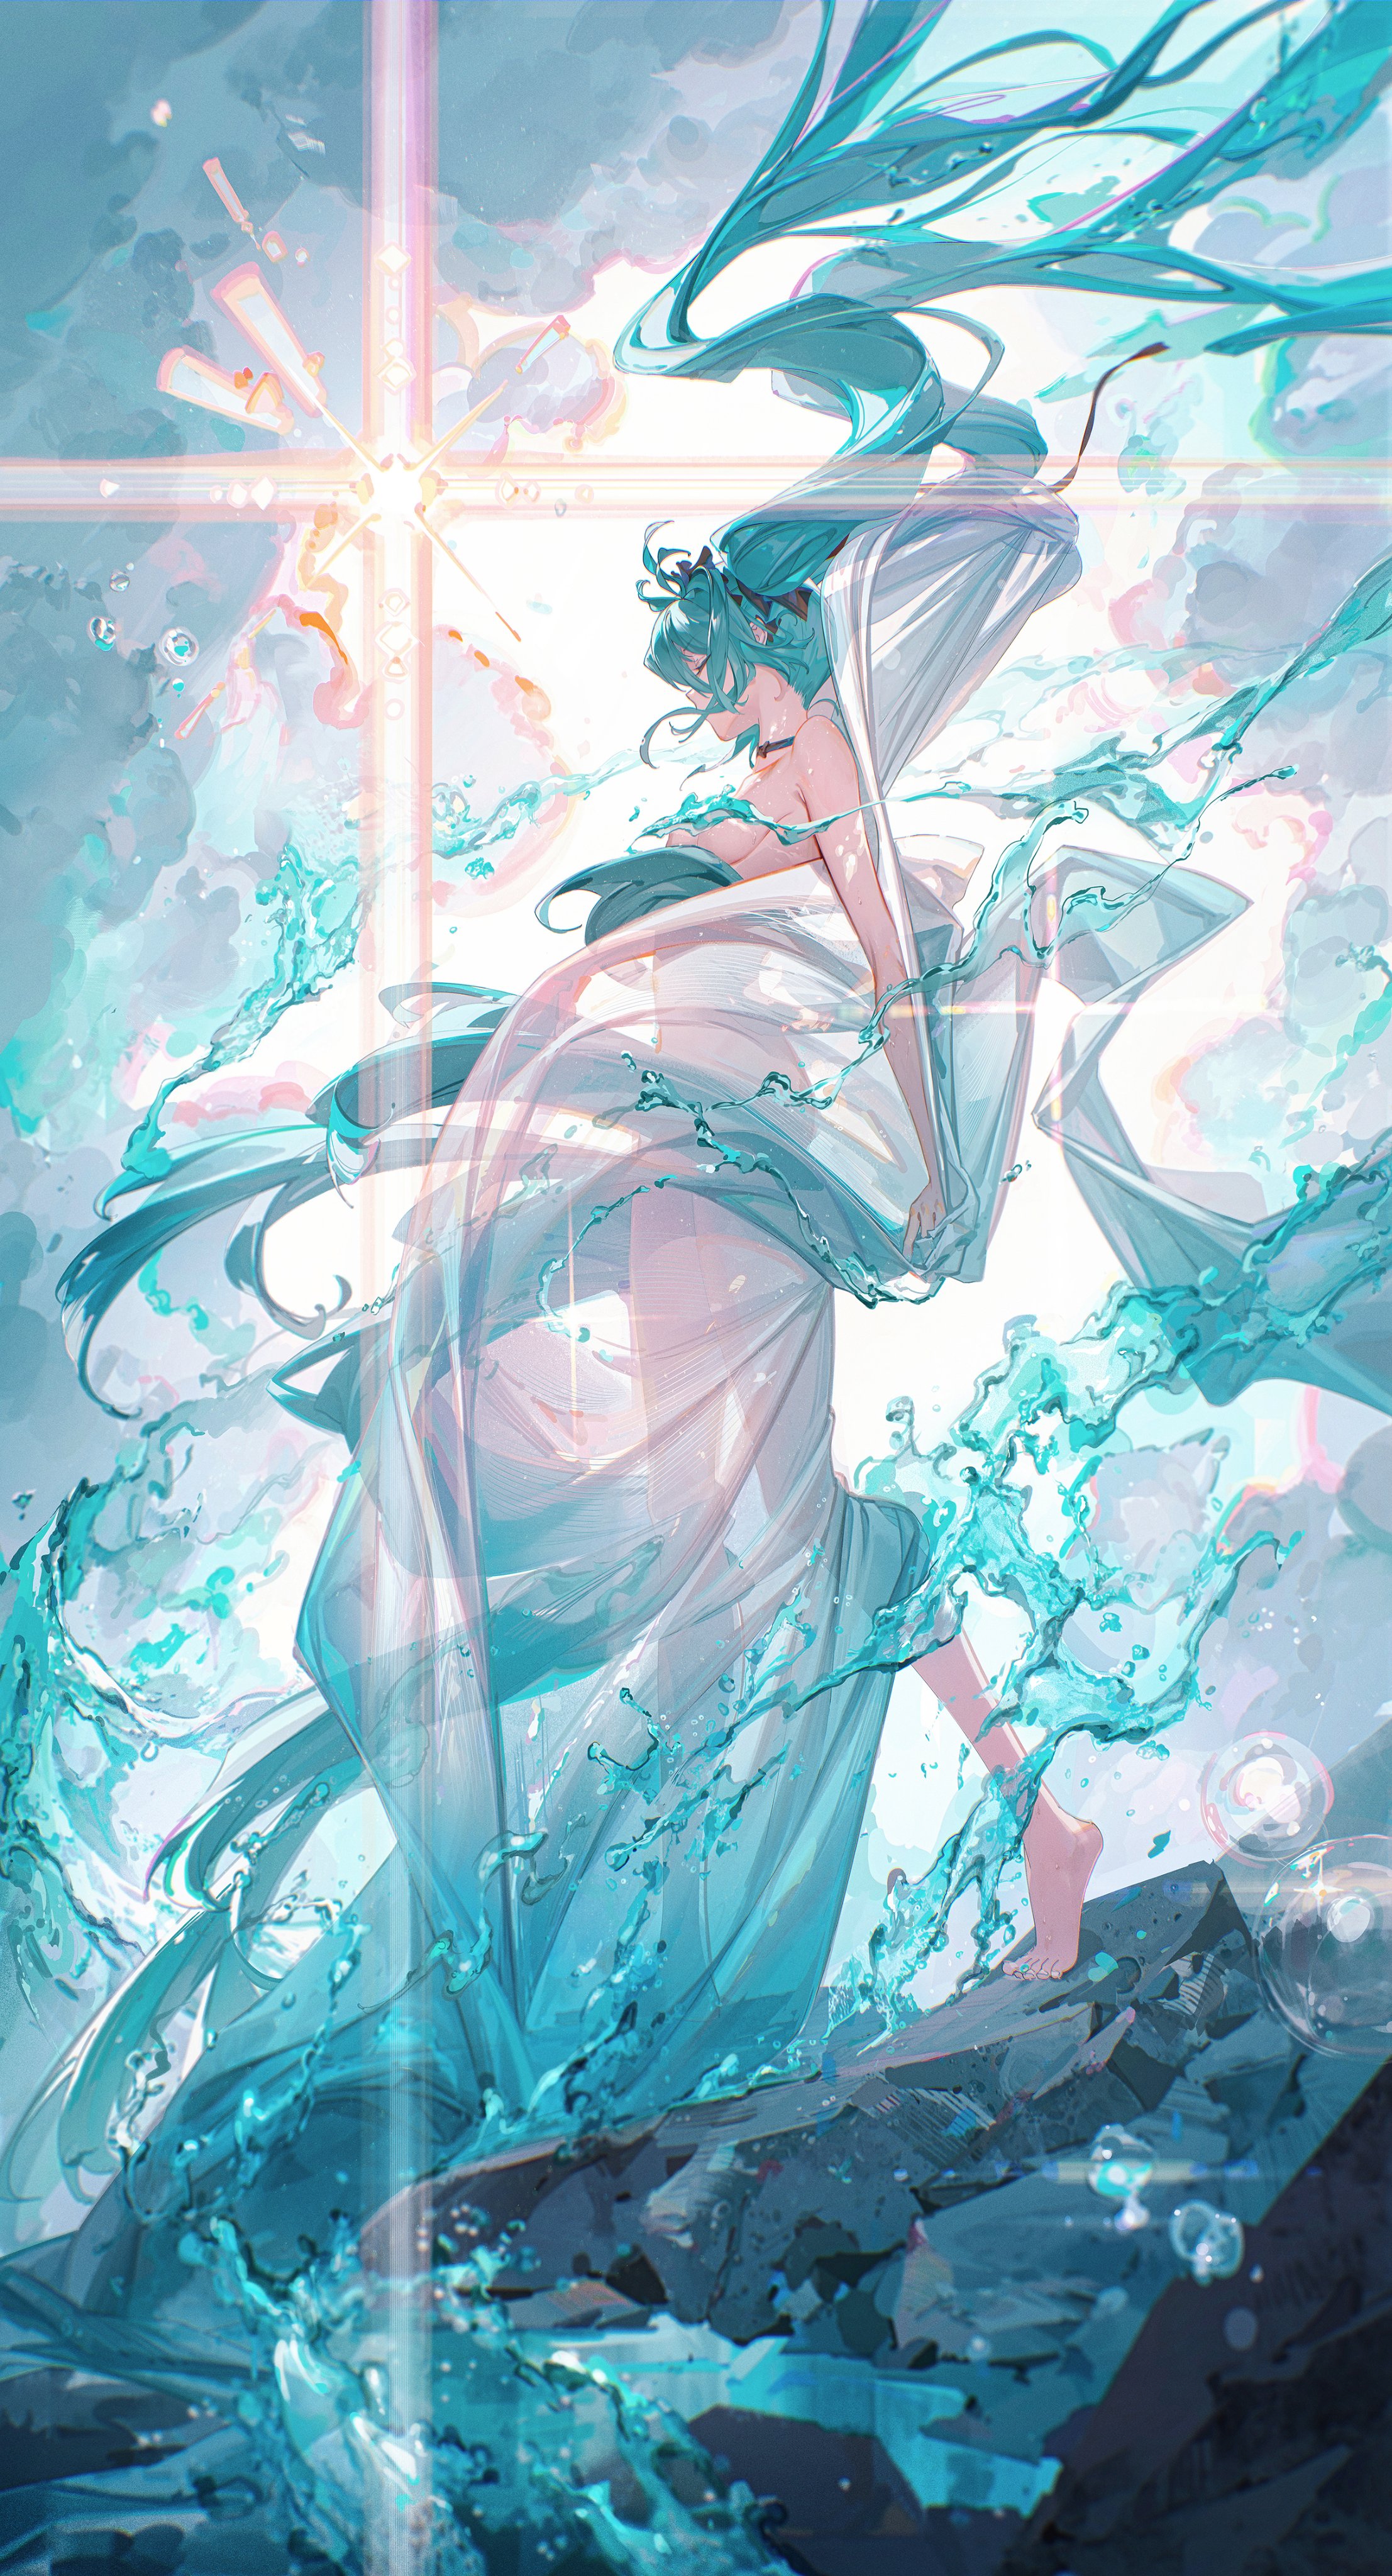 Anime 2214x4096 Vocaloid Hatsune Miku portrait display anime girls water drops twintails turquoise hair closed eyes profile women outdoors implied nude barefoot walking hair ribbon clouds sunlight sky long hair rocks Sun Ying Yi small boobs sideboob choker see-through clothing